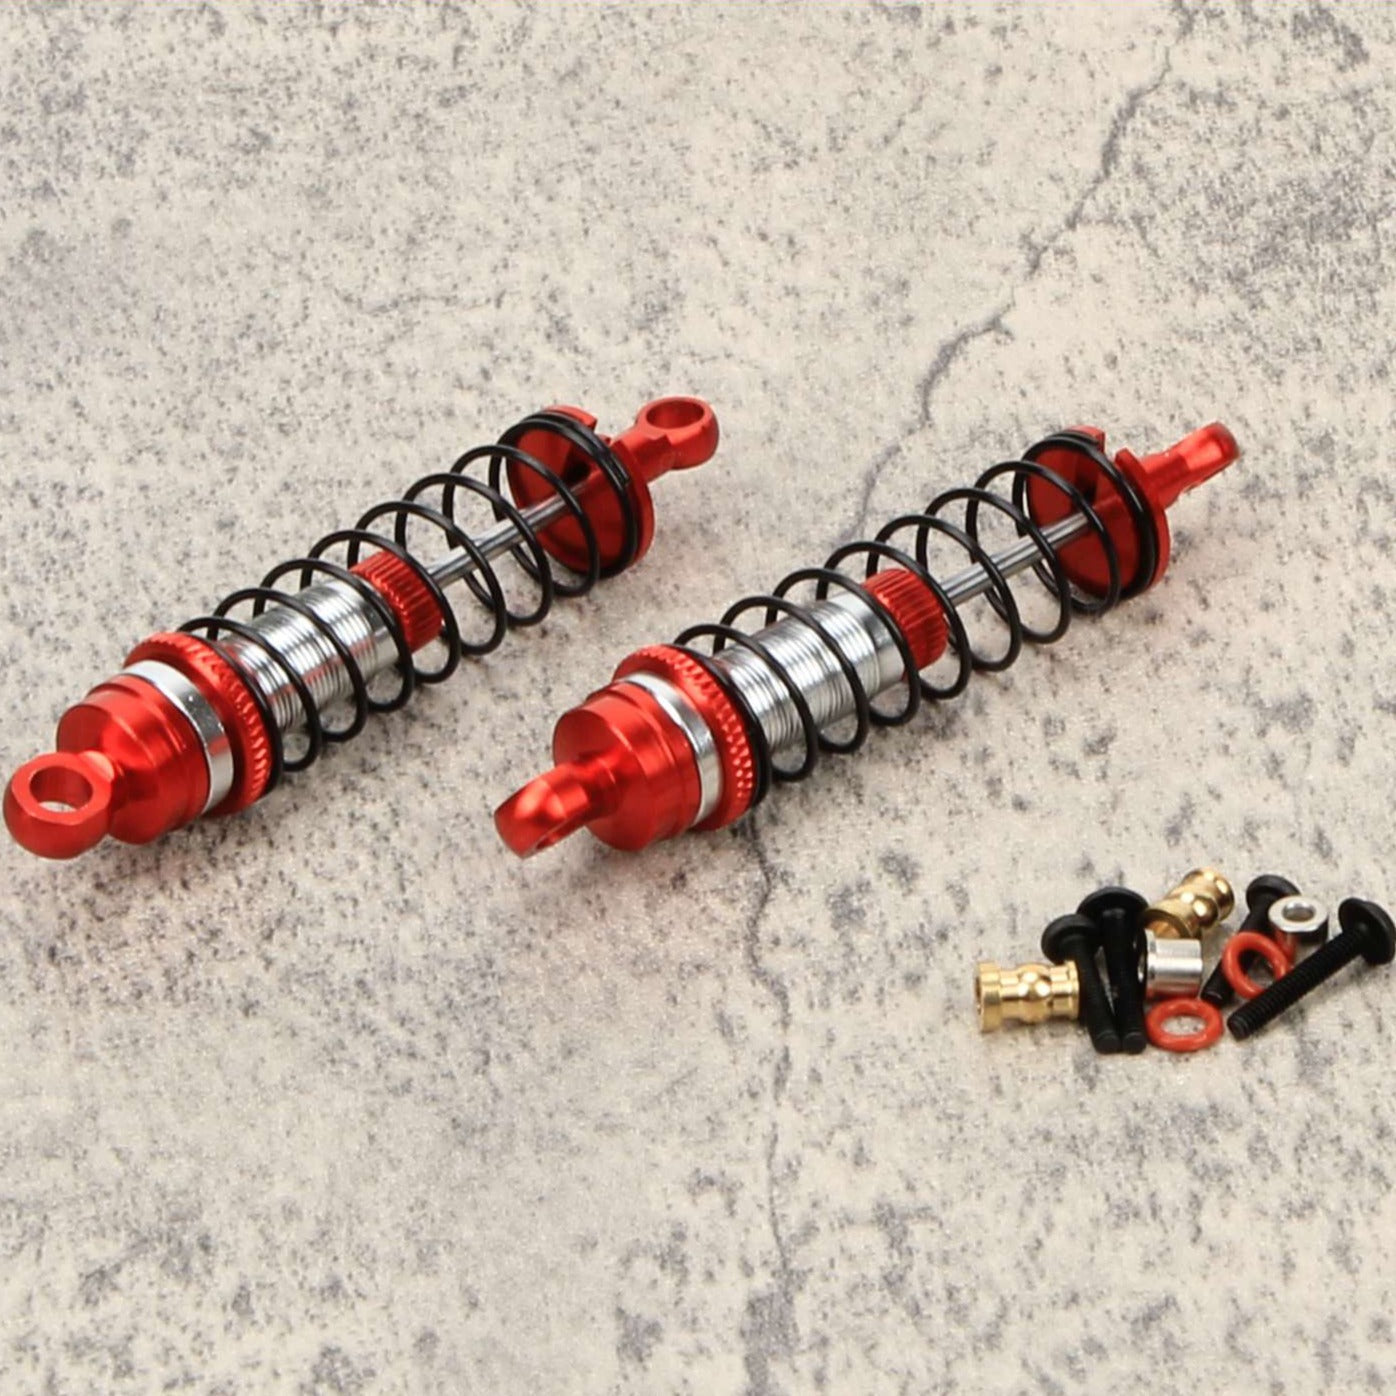 RCAWD Red RCAWD Losi mini-B mini-T 2x full alloy rear shock absorber damper oil filled type LOS213001